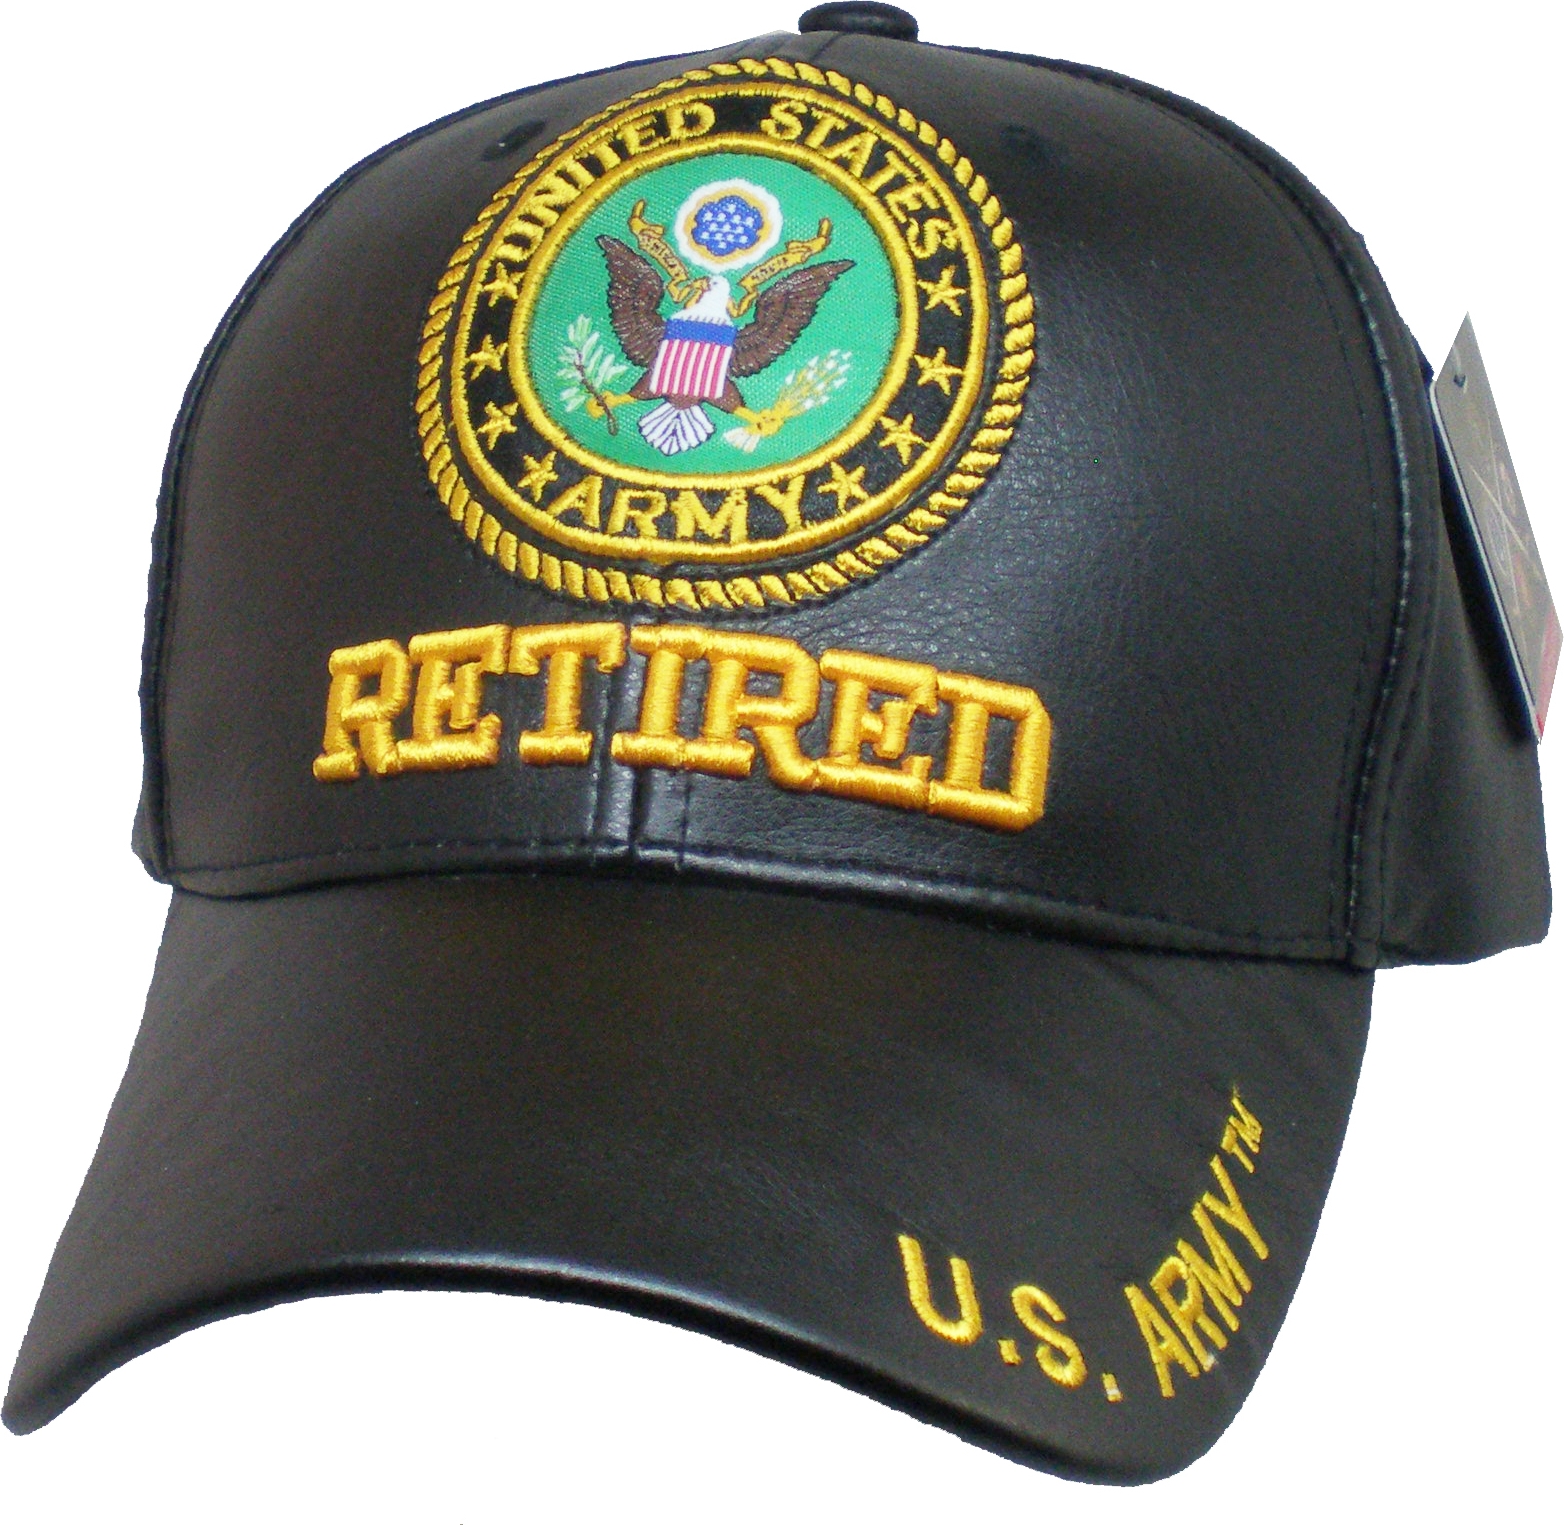 Us Army Retired Hats